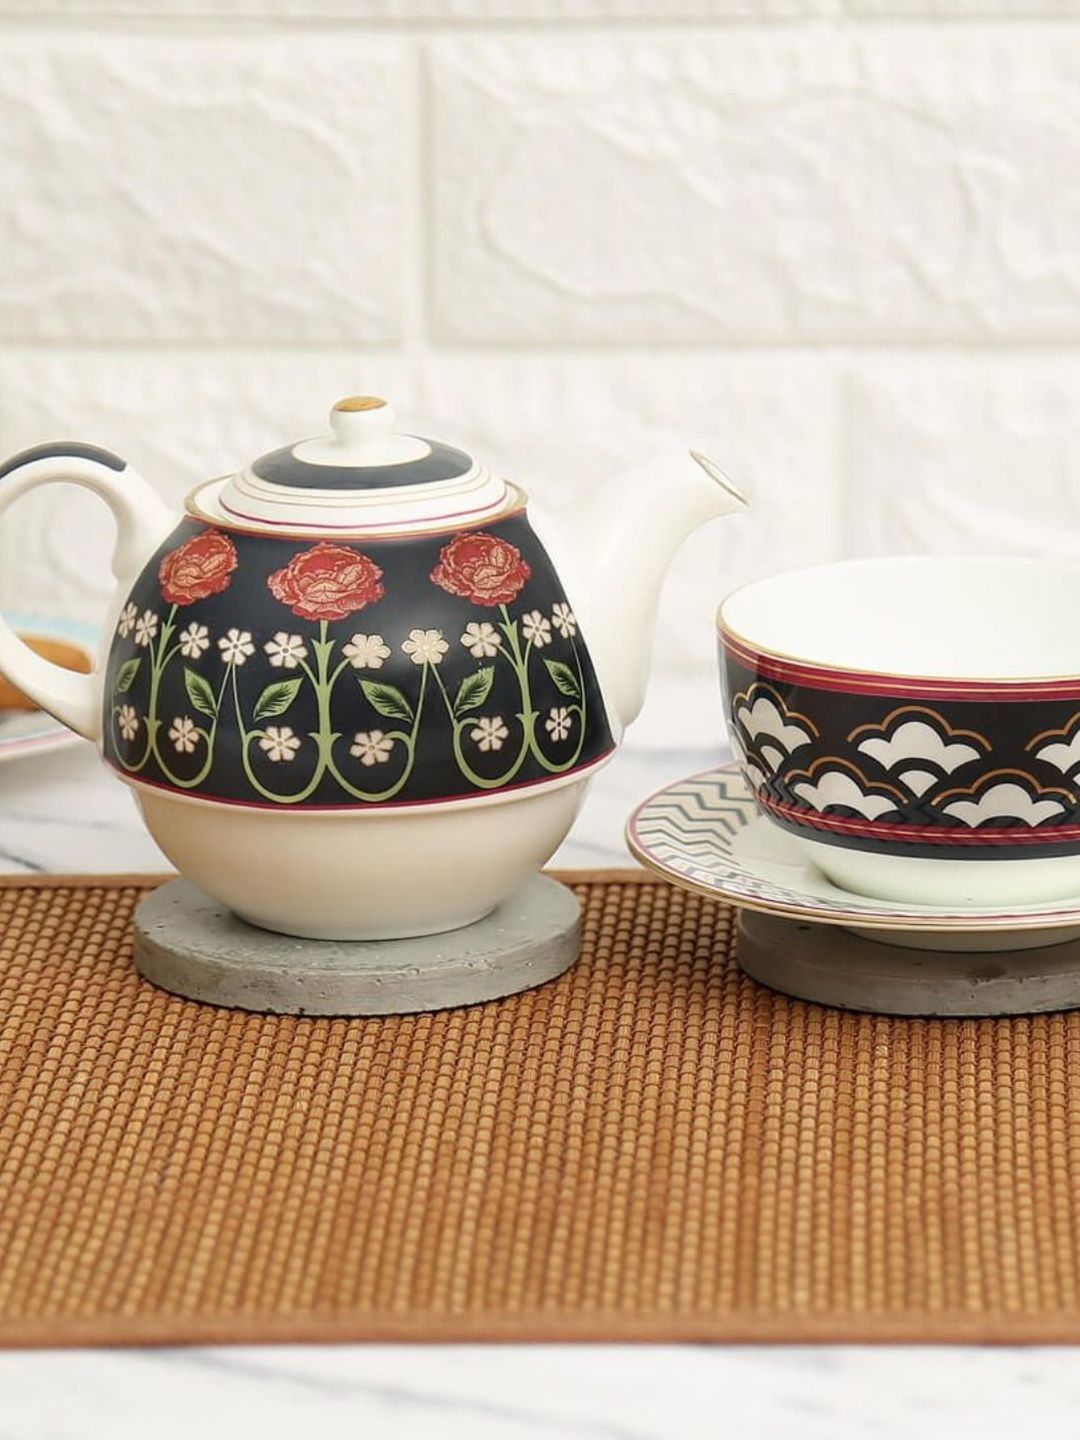 India Circus Black & Pink Floral Printed Ceramic Glossy Kettle Set of Cups and Mugs Price in India